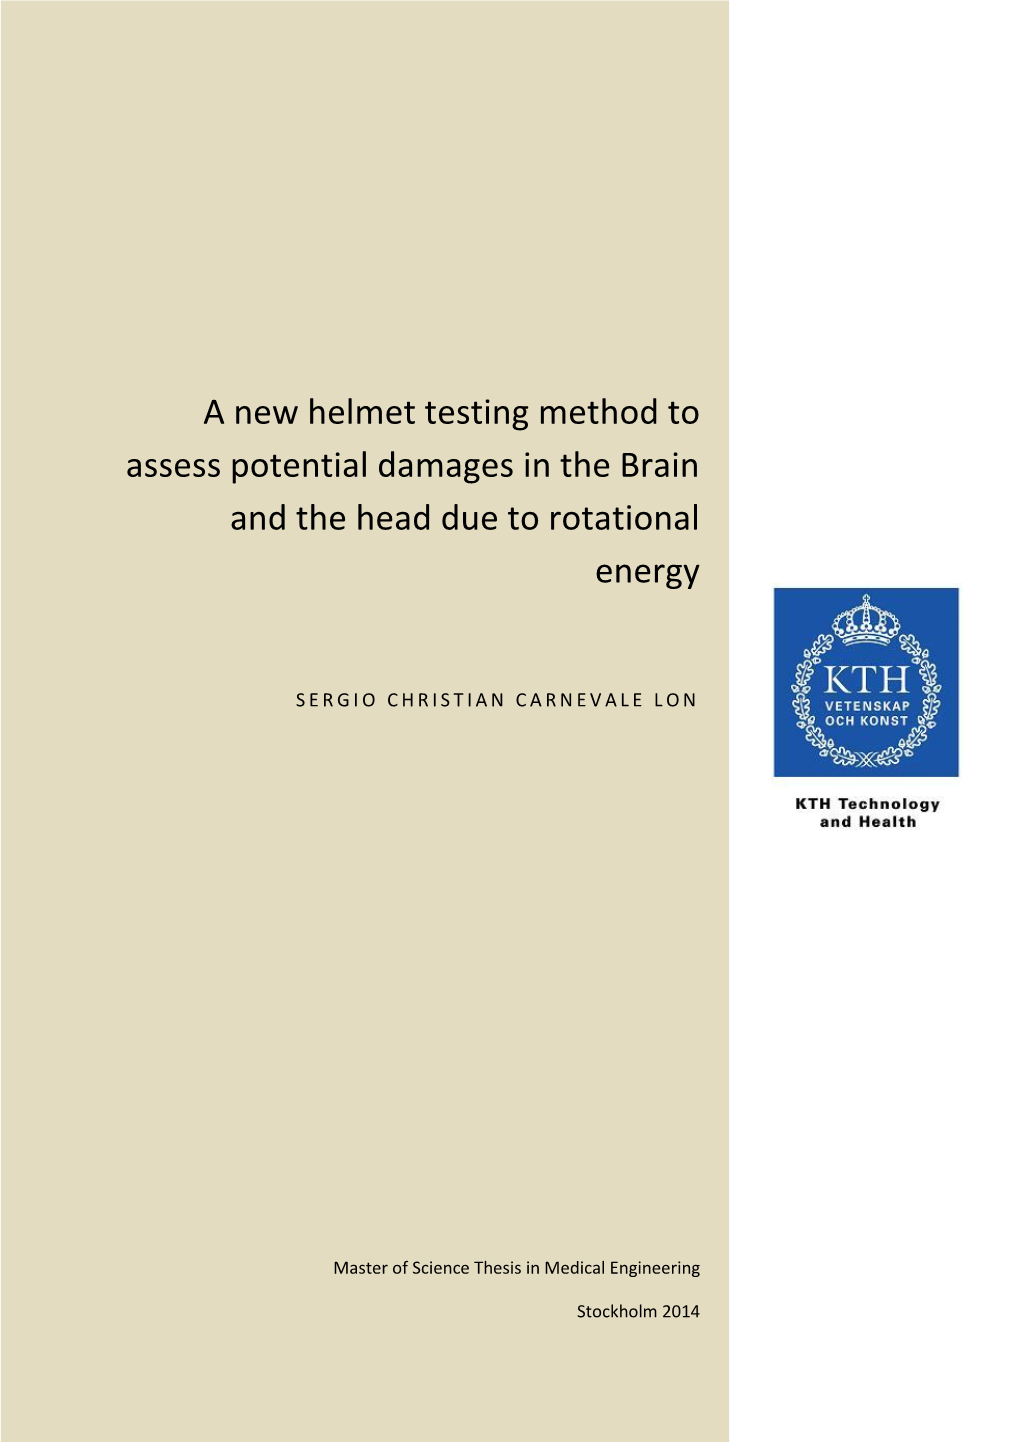 A New Helmet Testing Method to Assess Potential Damages in the Brain and the Head Due to Rotational Energy